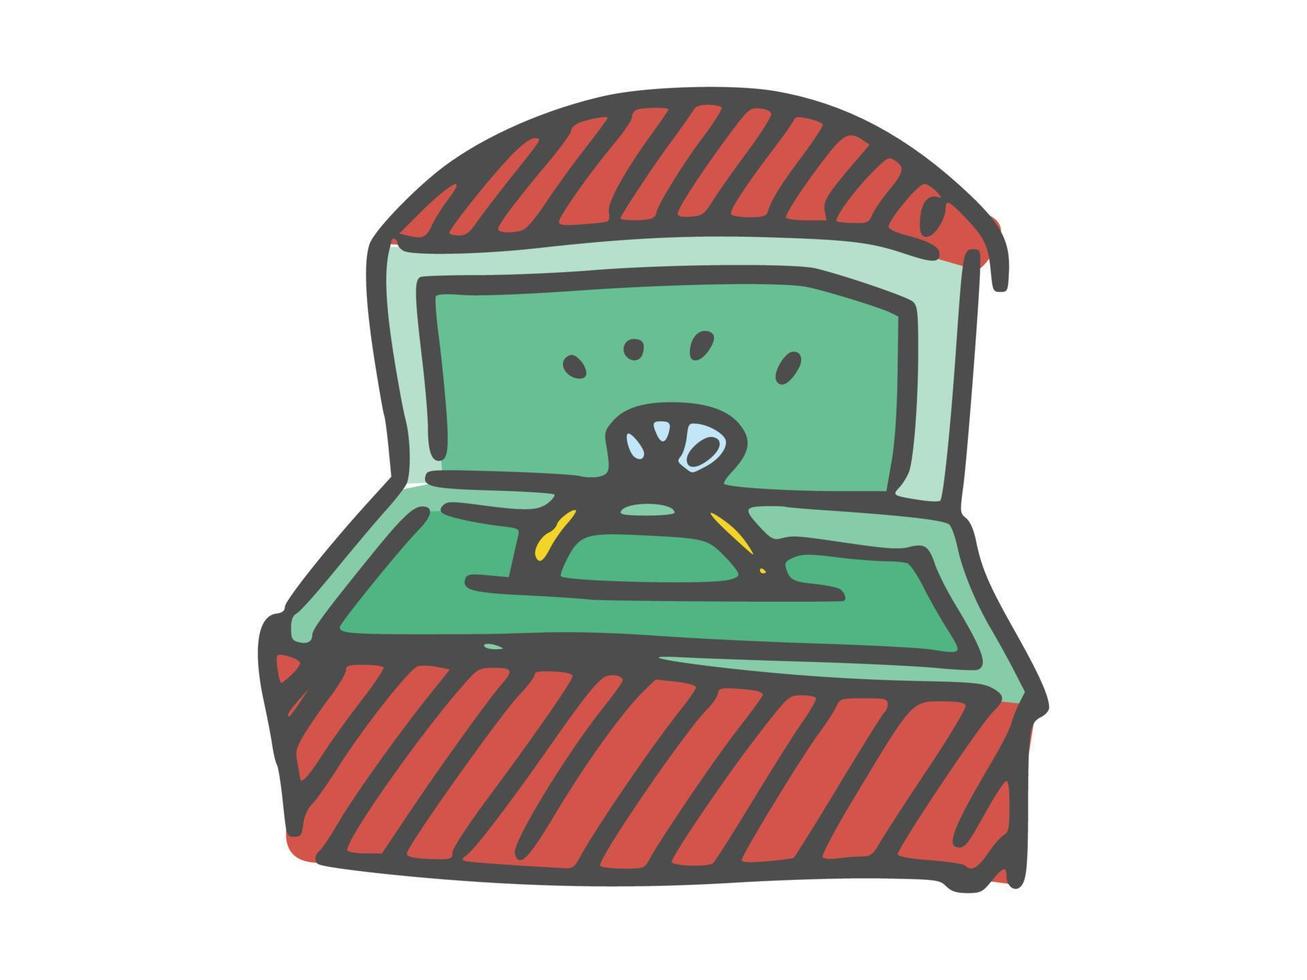 wedding ring in a gift box doodle drawing. sketch vector